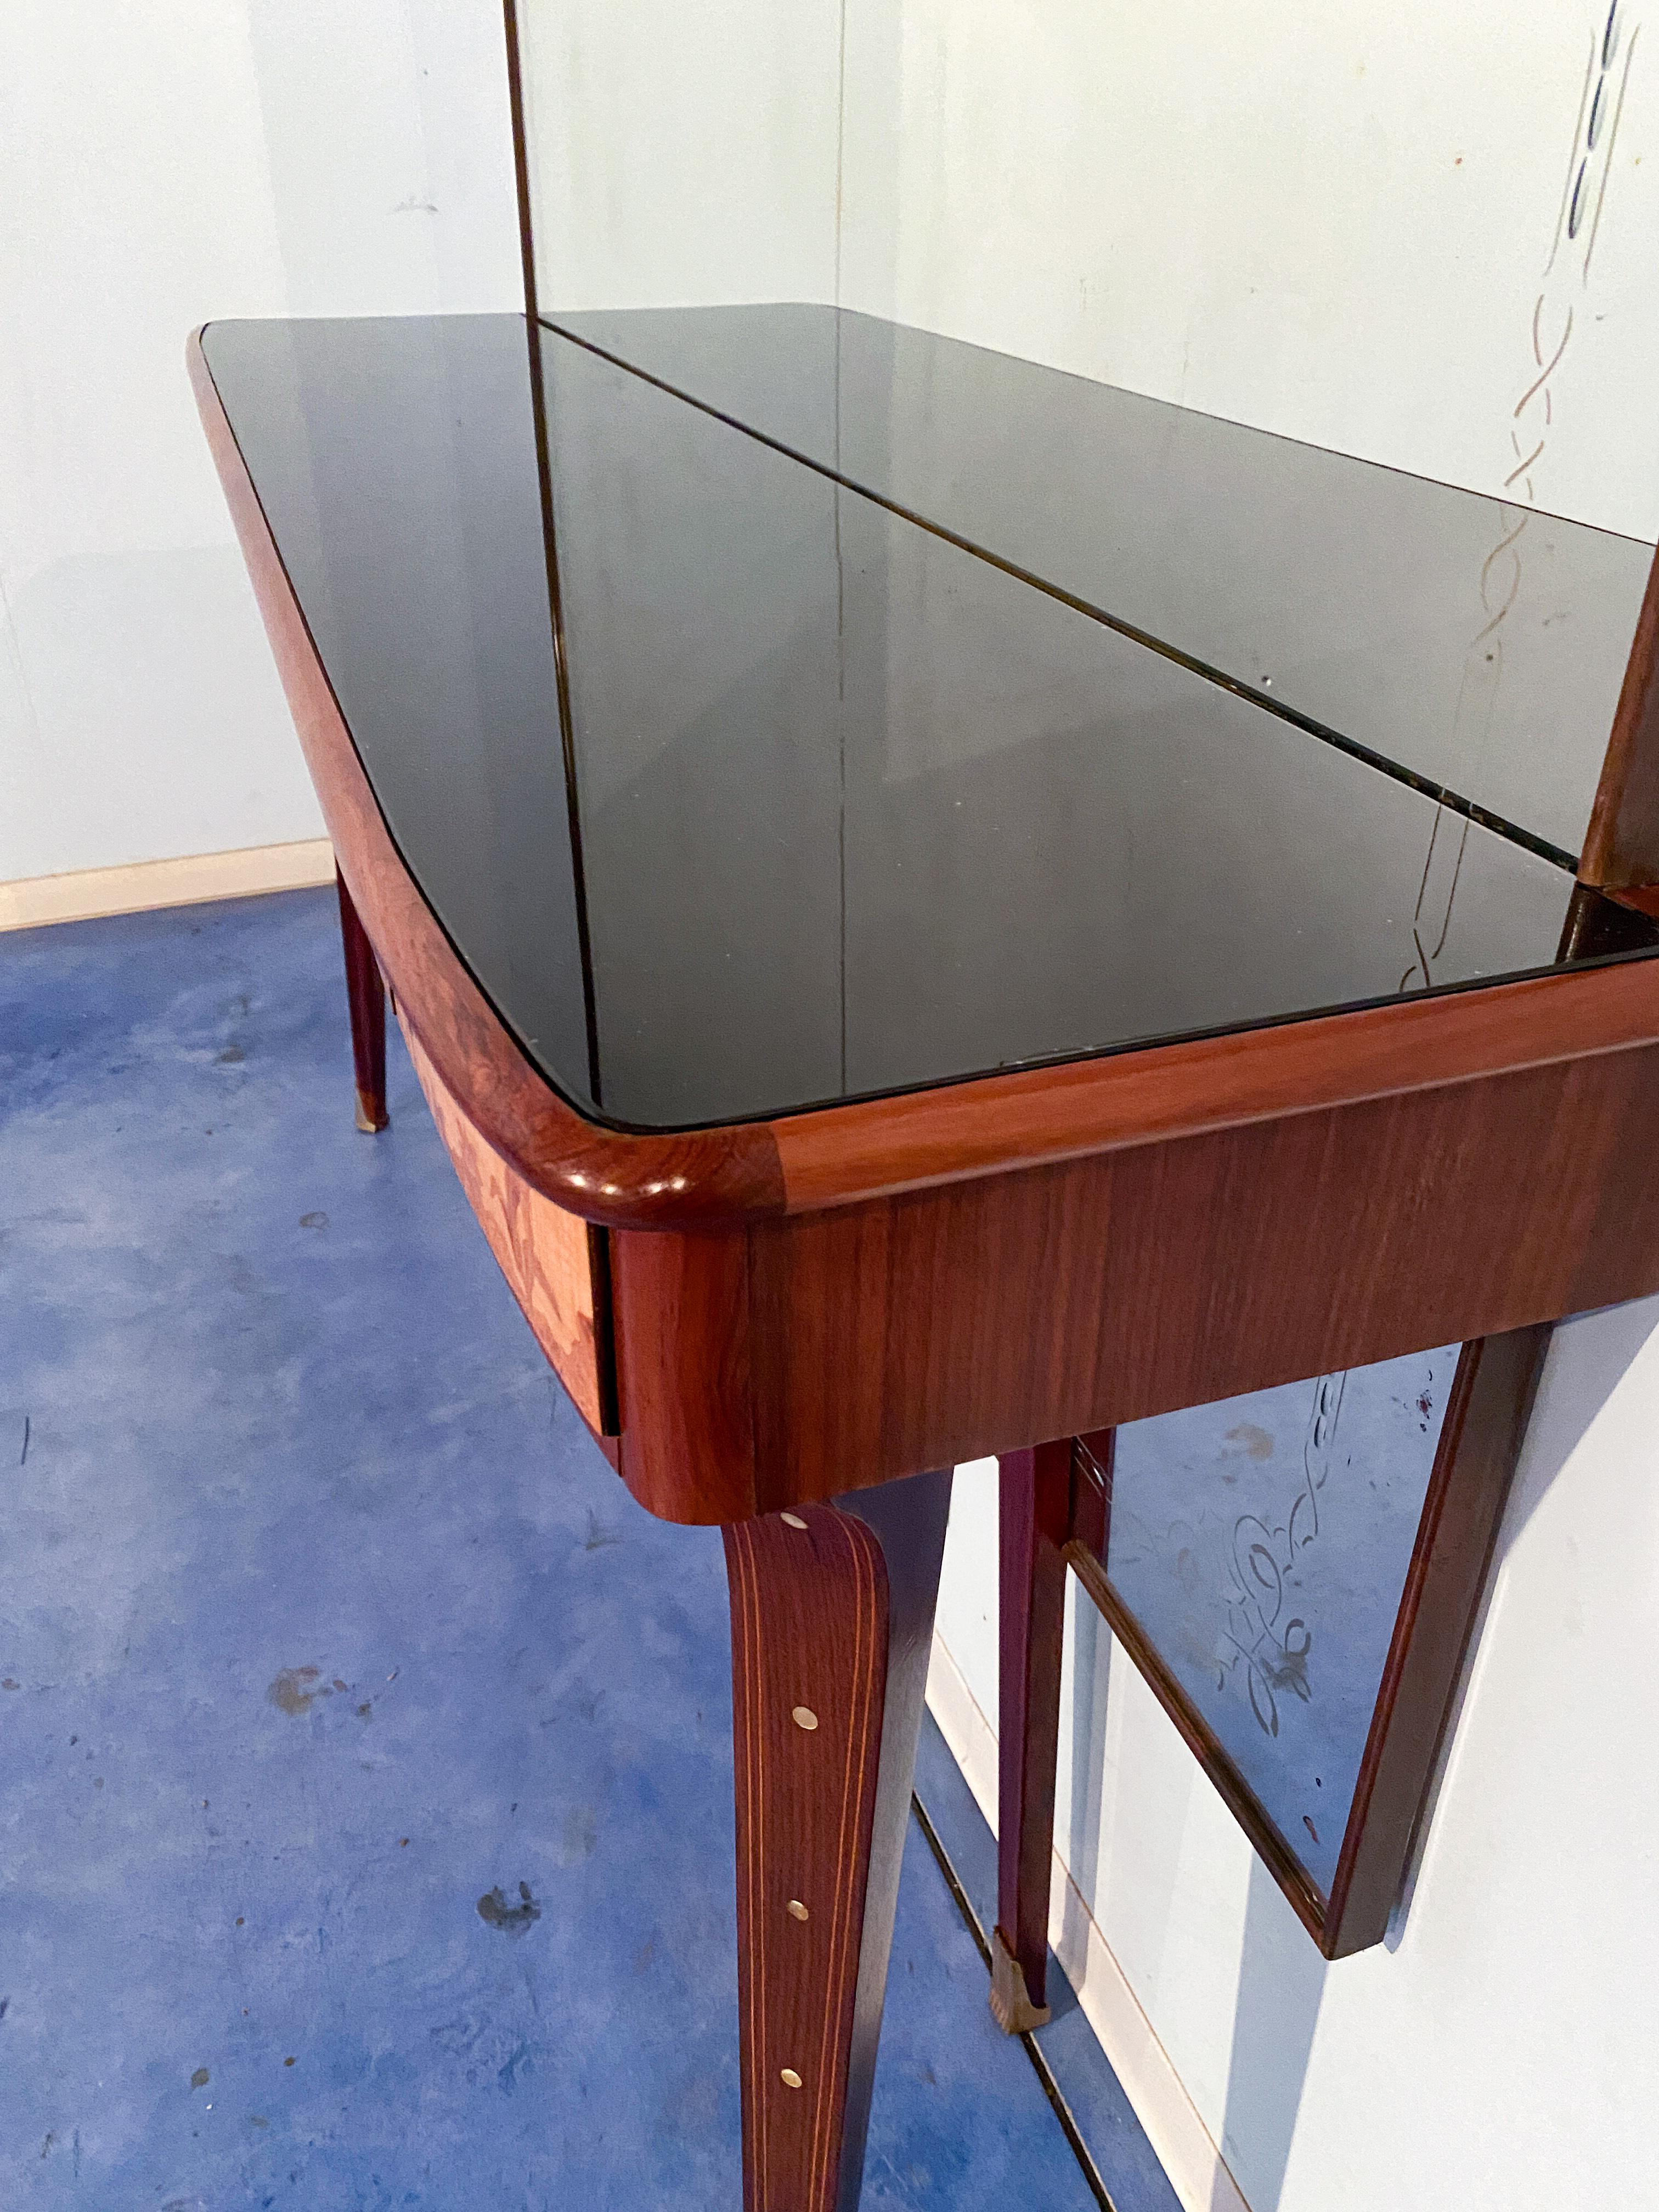 Italian Midcentury Inlaid Console with Mirror by Andrea Gusmai, 1950s For Sale 6